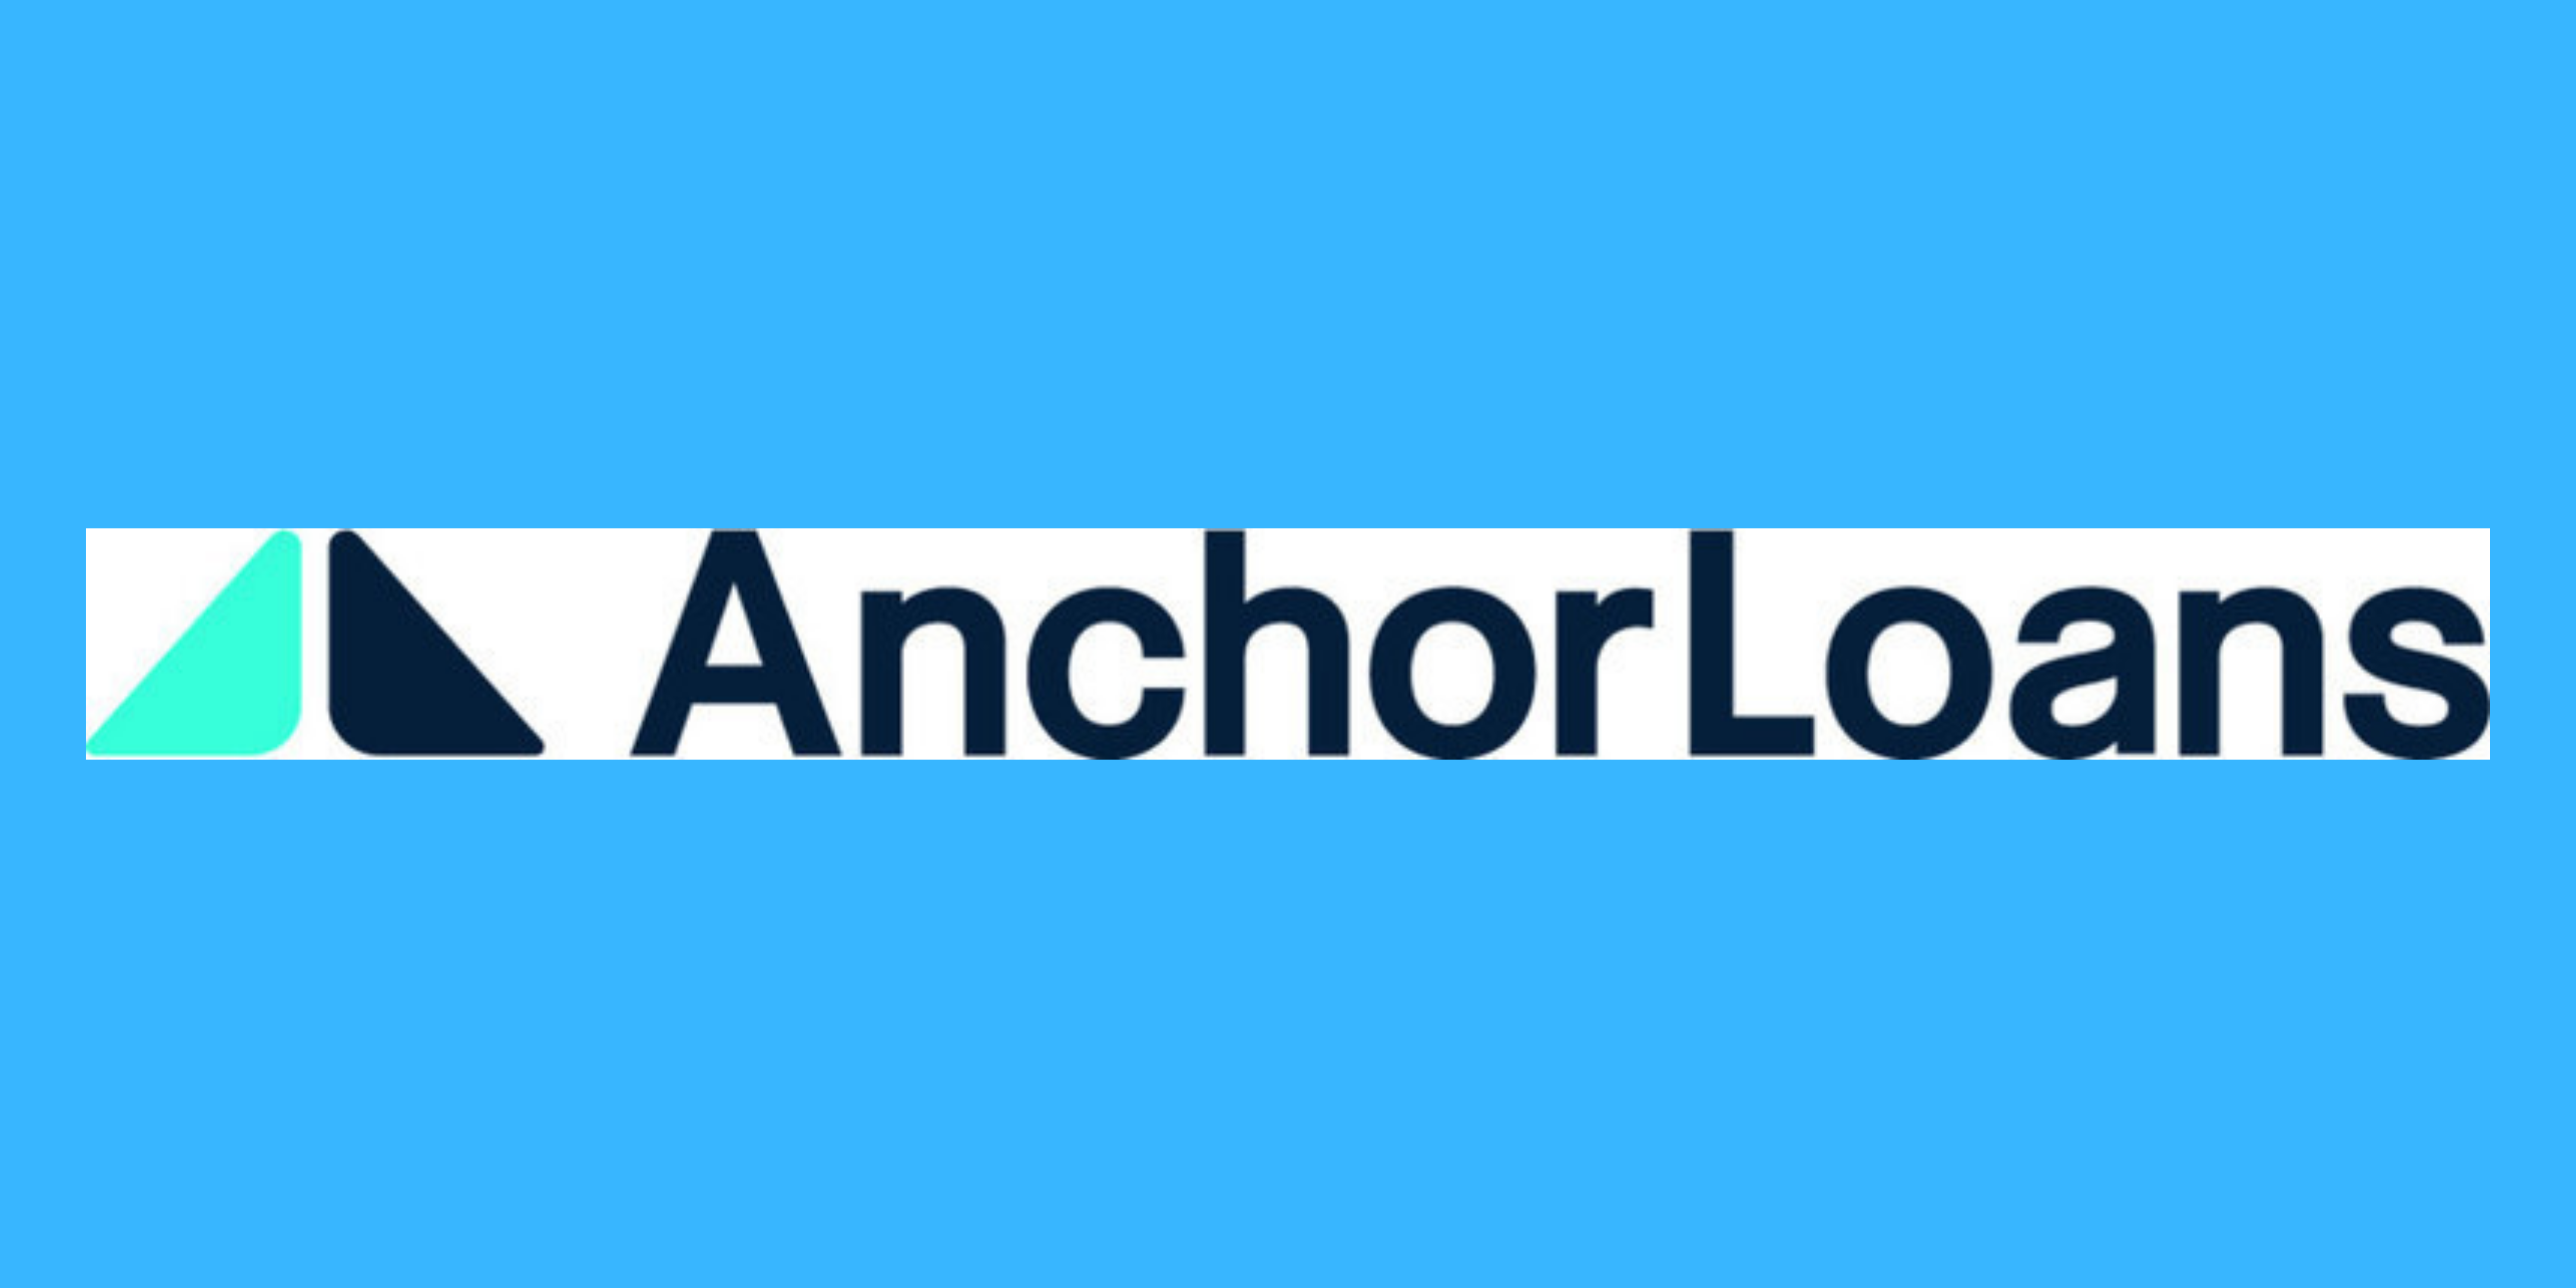 Anchor Loans Rebrands As Part Of Growth And Expansion Strategy